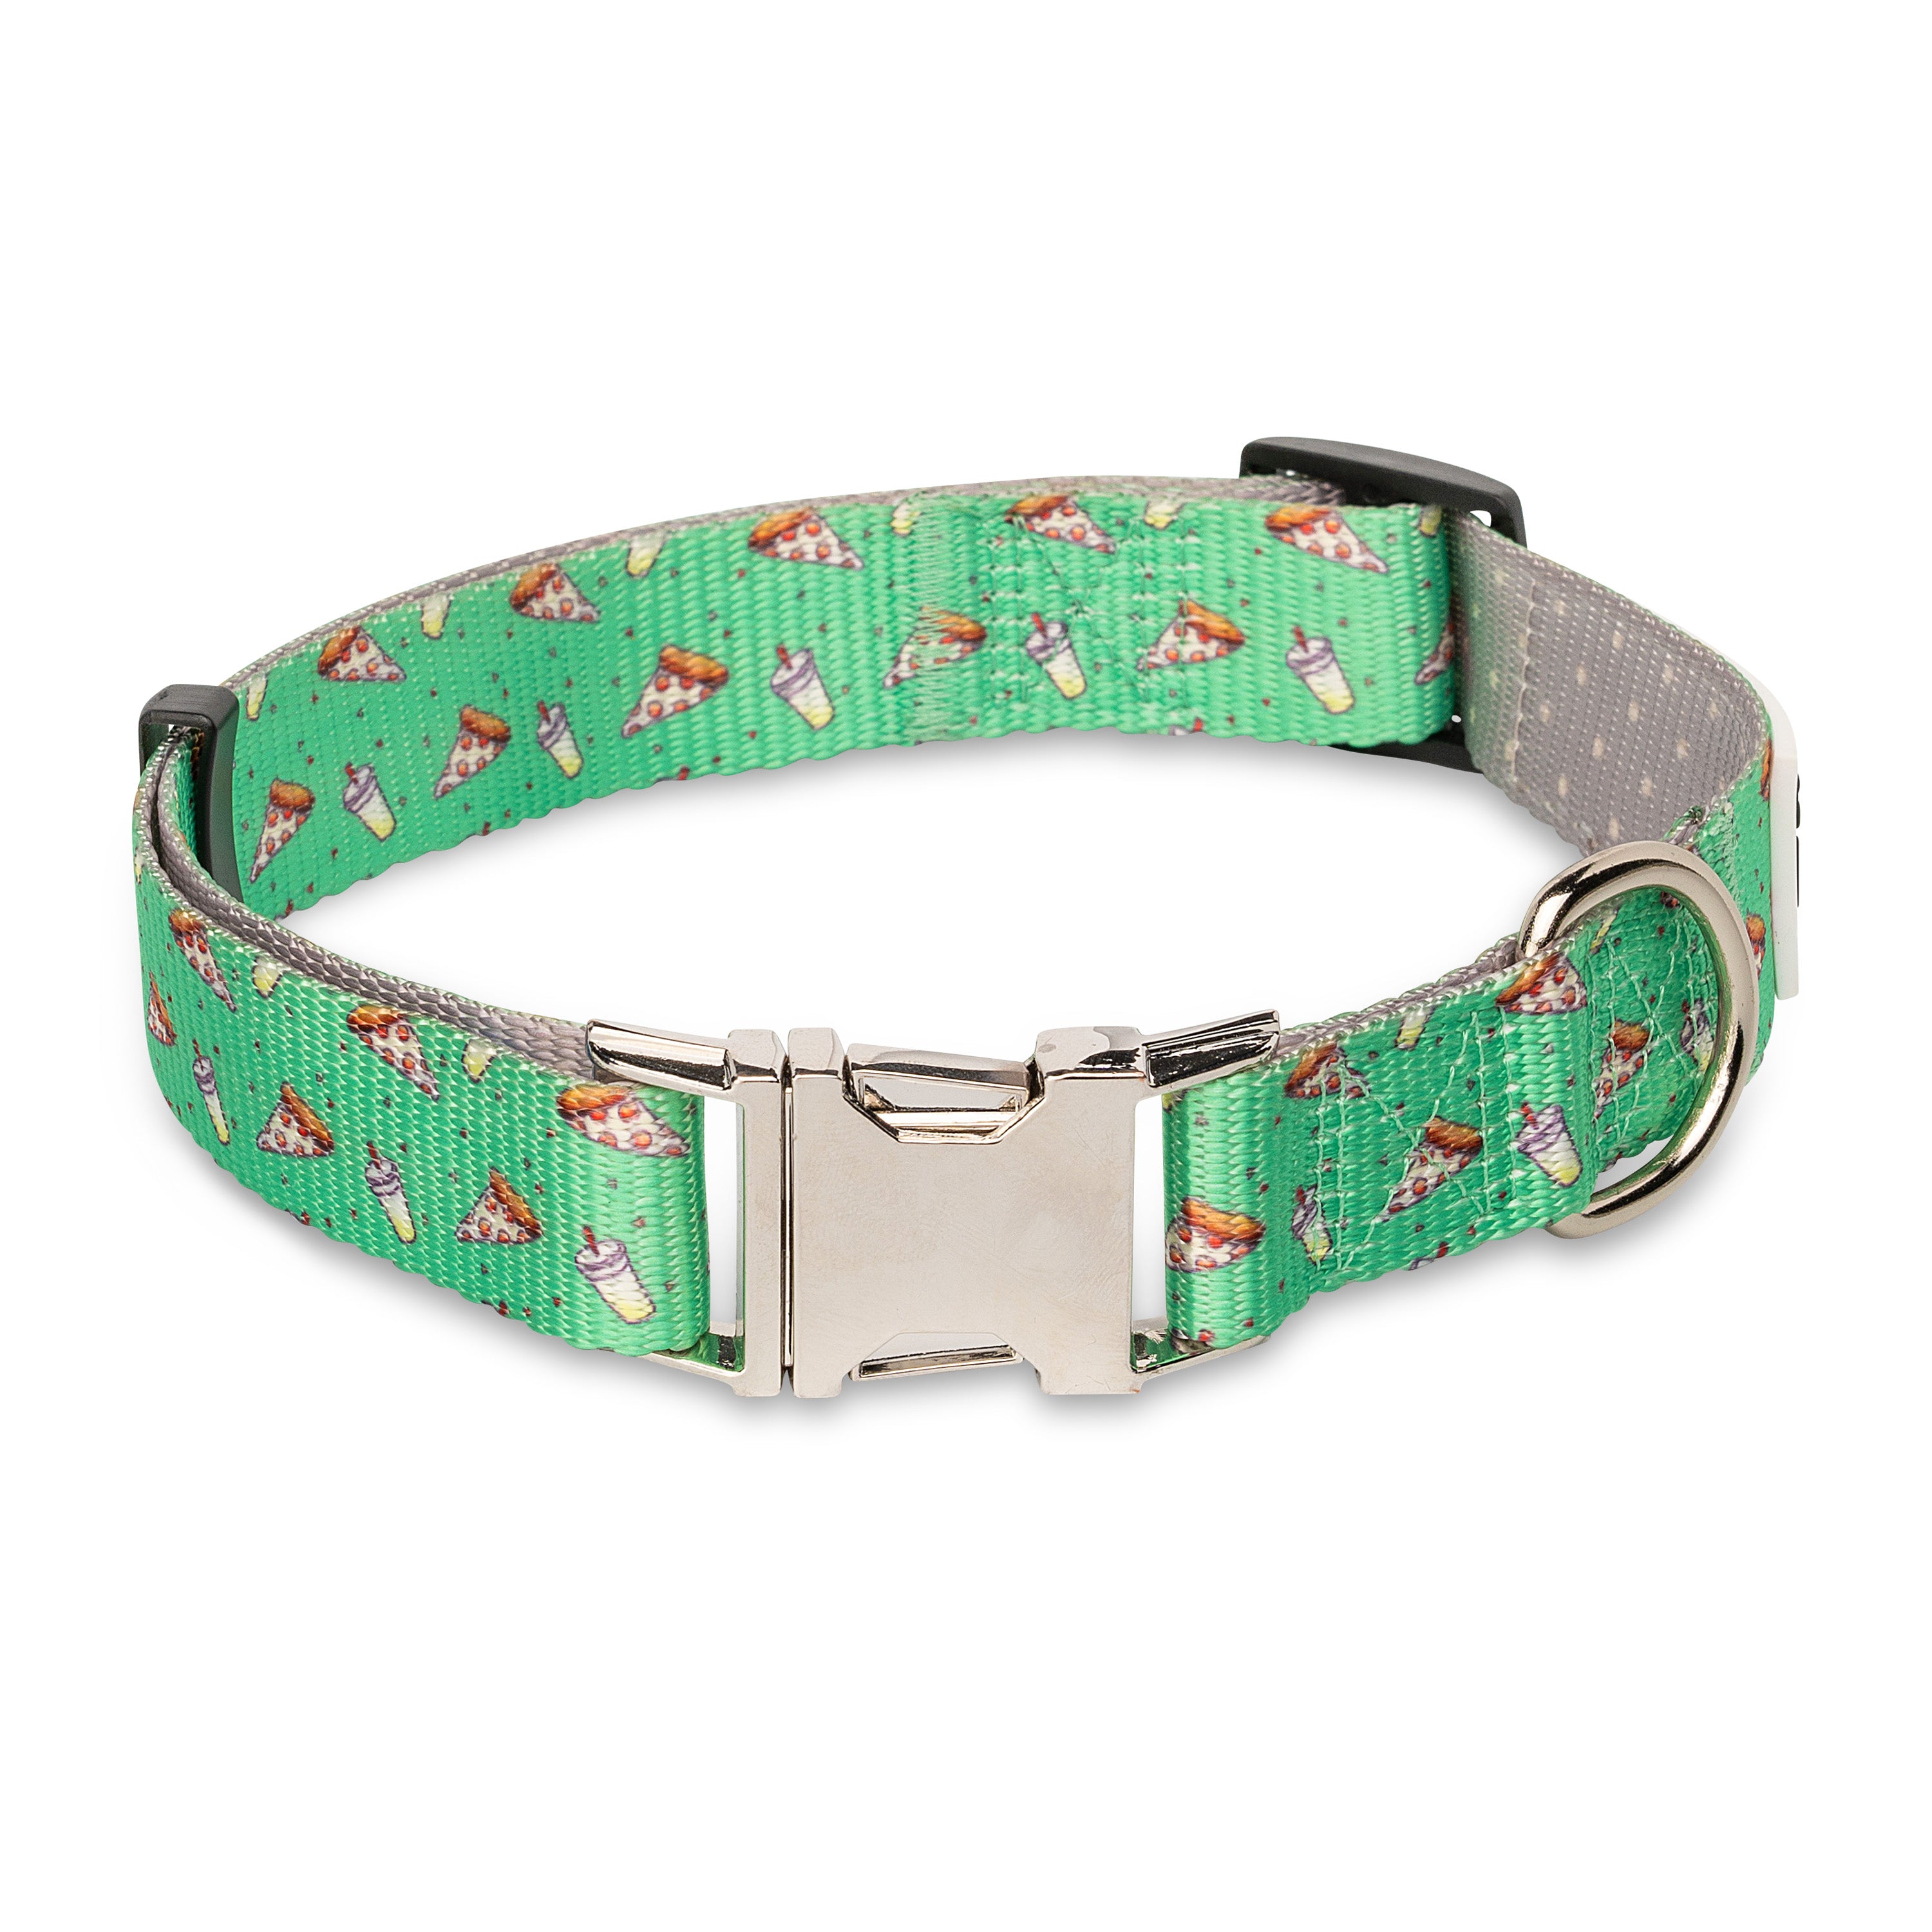 The Modern Dog Company - Pizza Party Collar